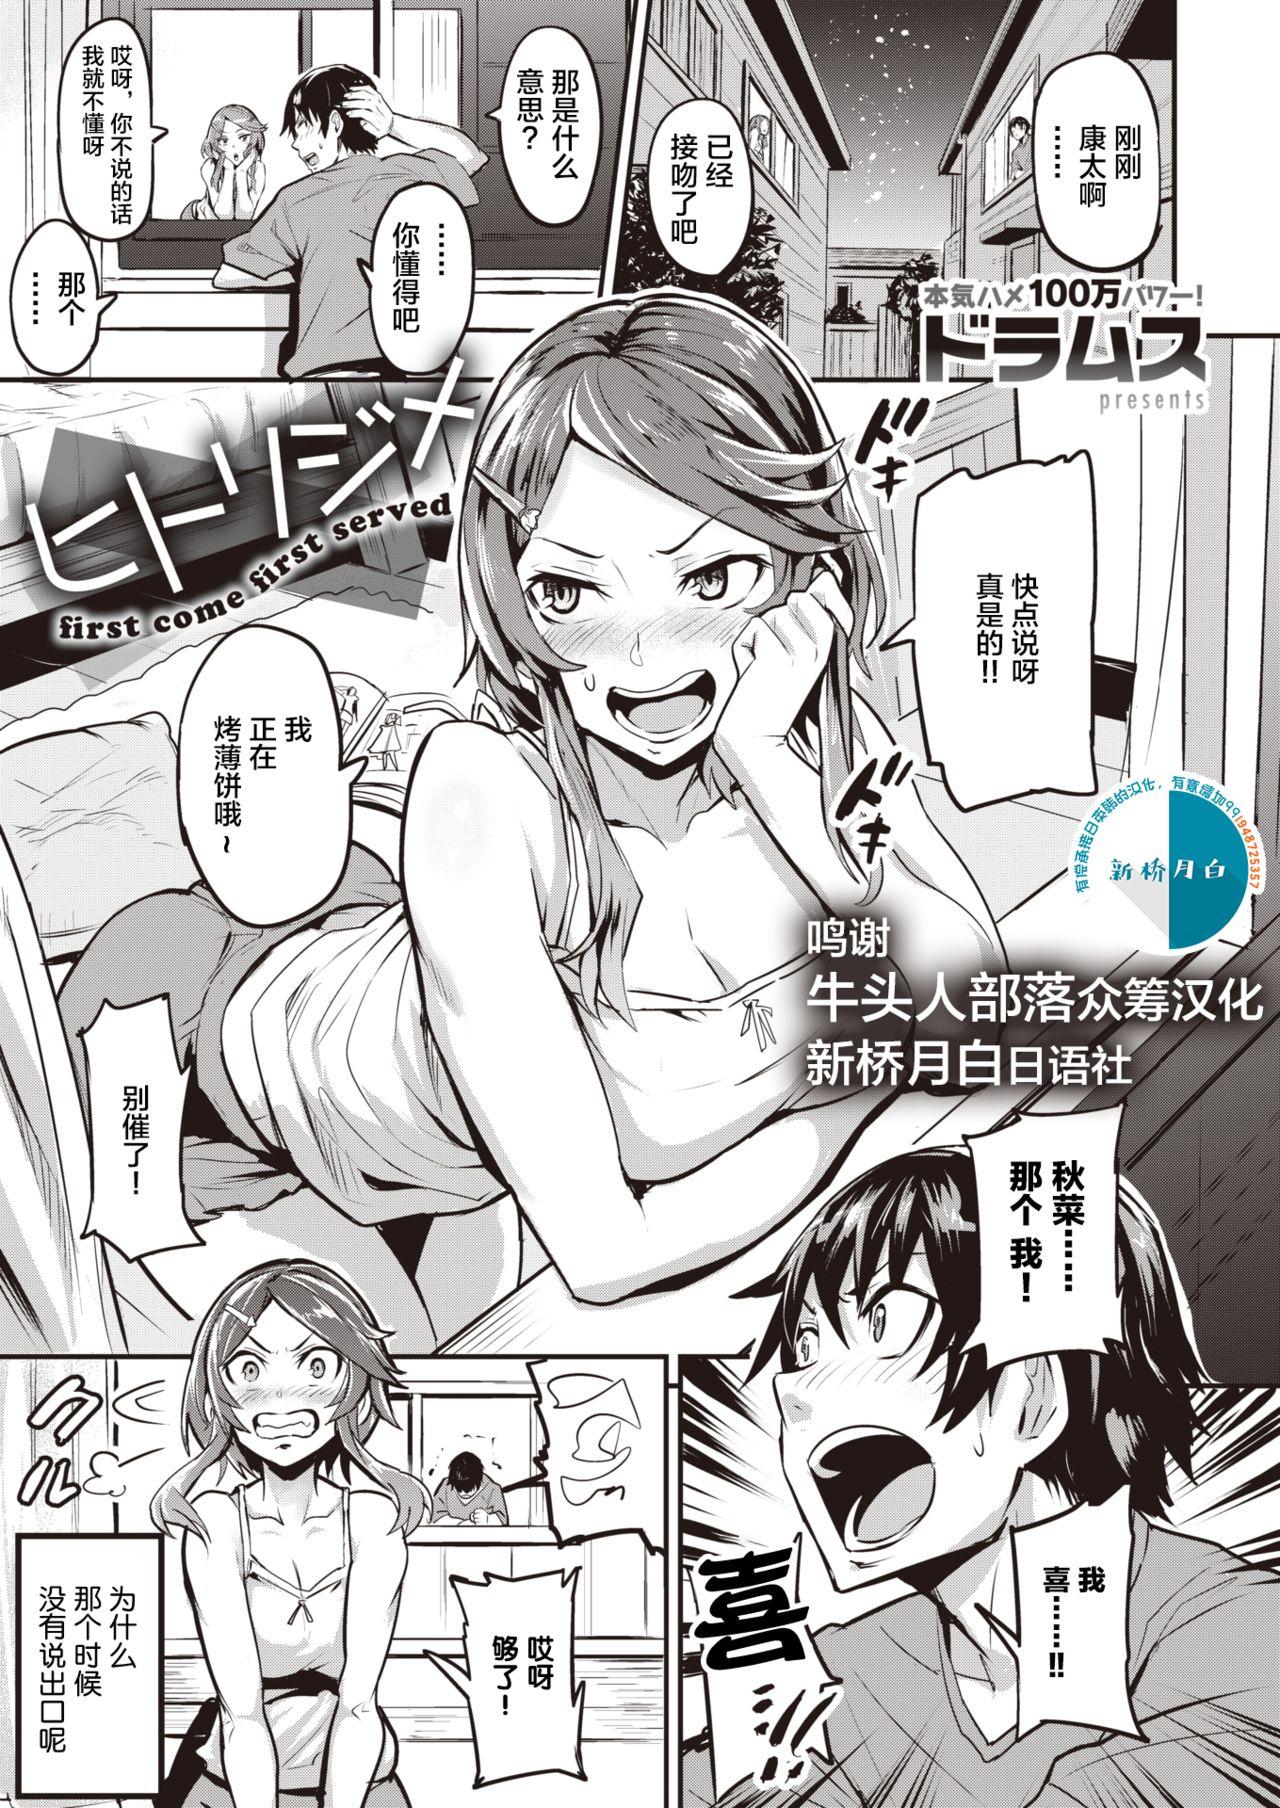 Fuck Com [Dramus] Hitorijime - first come first served Ch. 1-3 [Chinese] [牛头人部落×新桥月白日语社] Colegiala - Picture 1